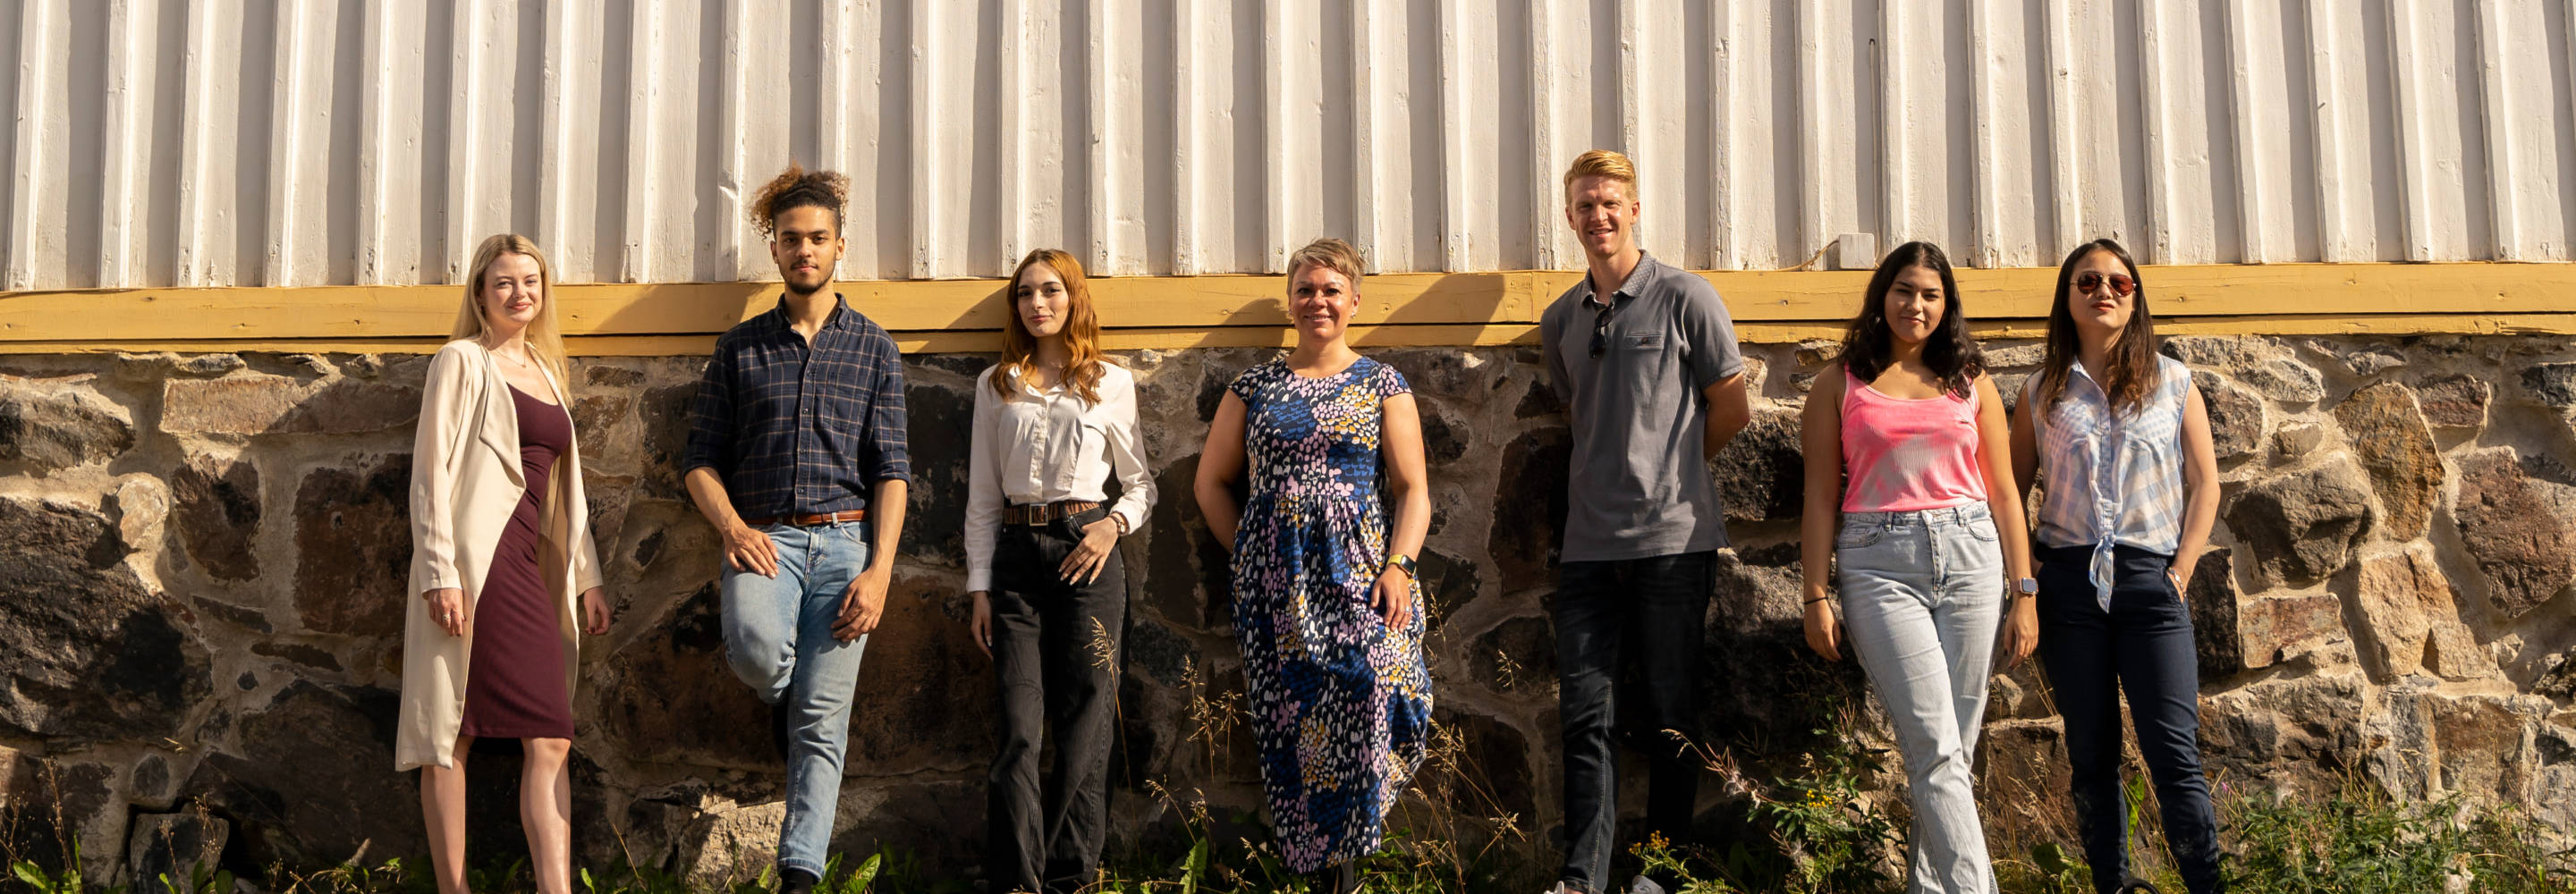 Diverse group of students posing for the camera in the old wooden house district of Kokkola